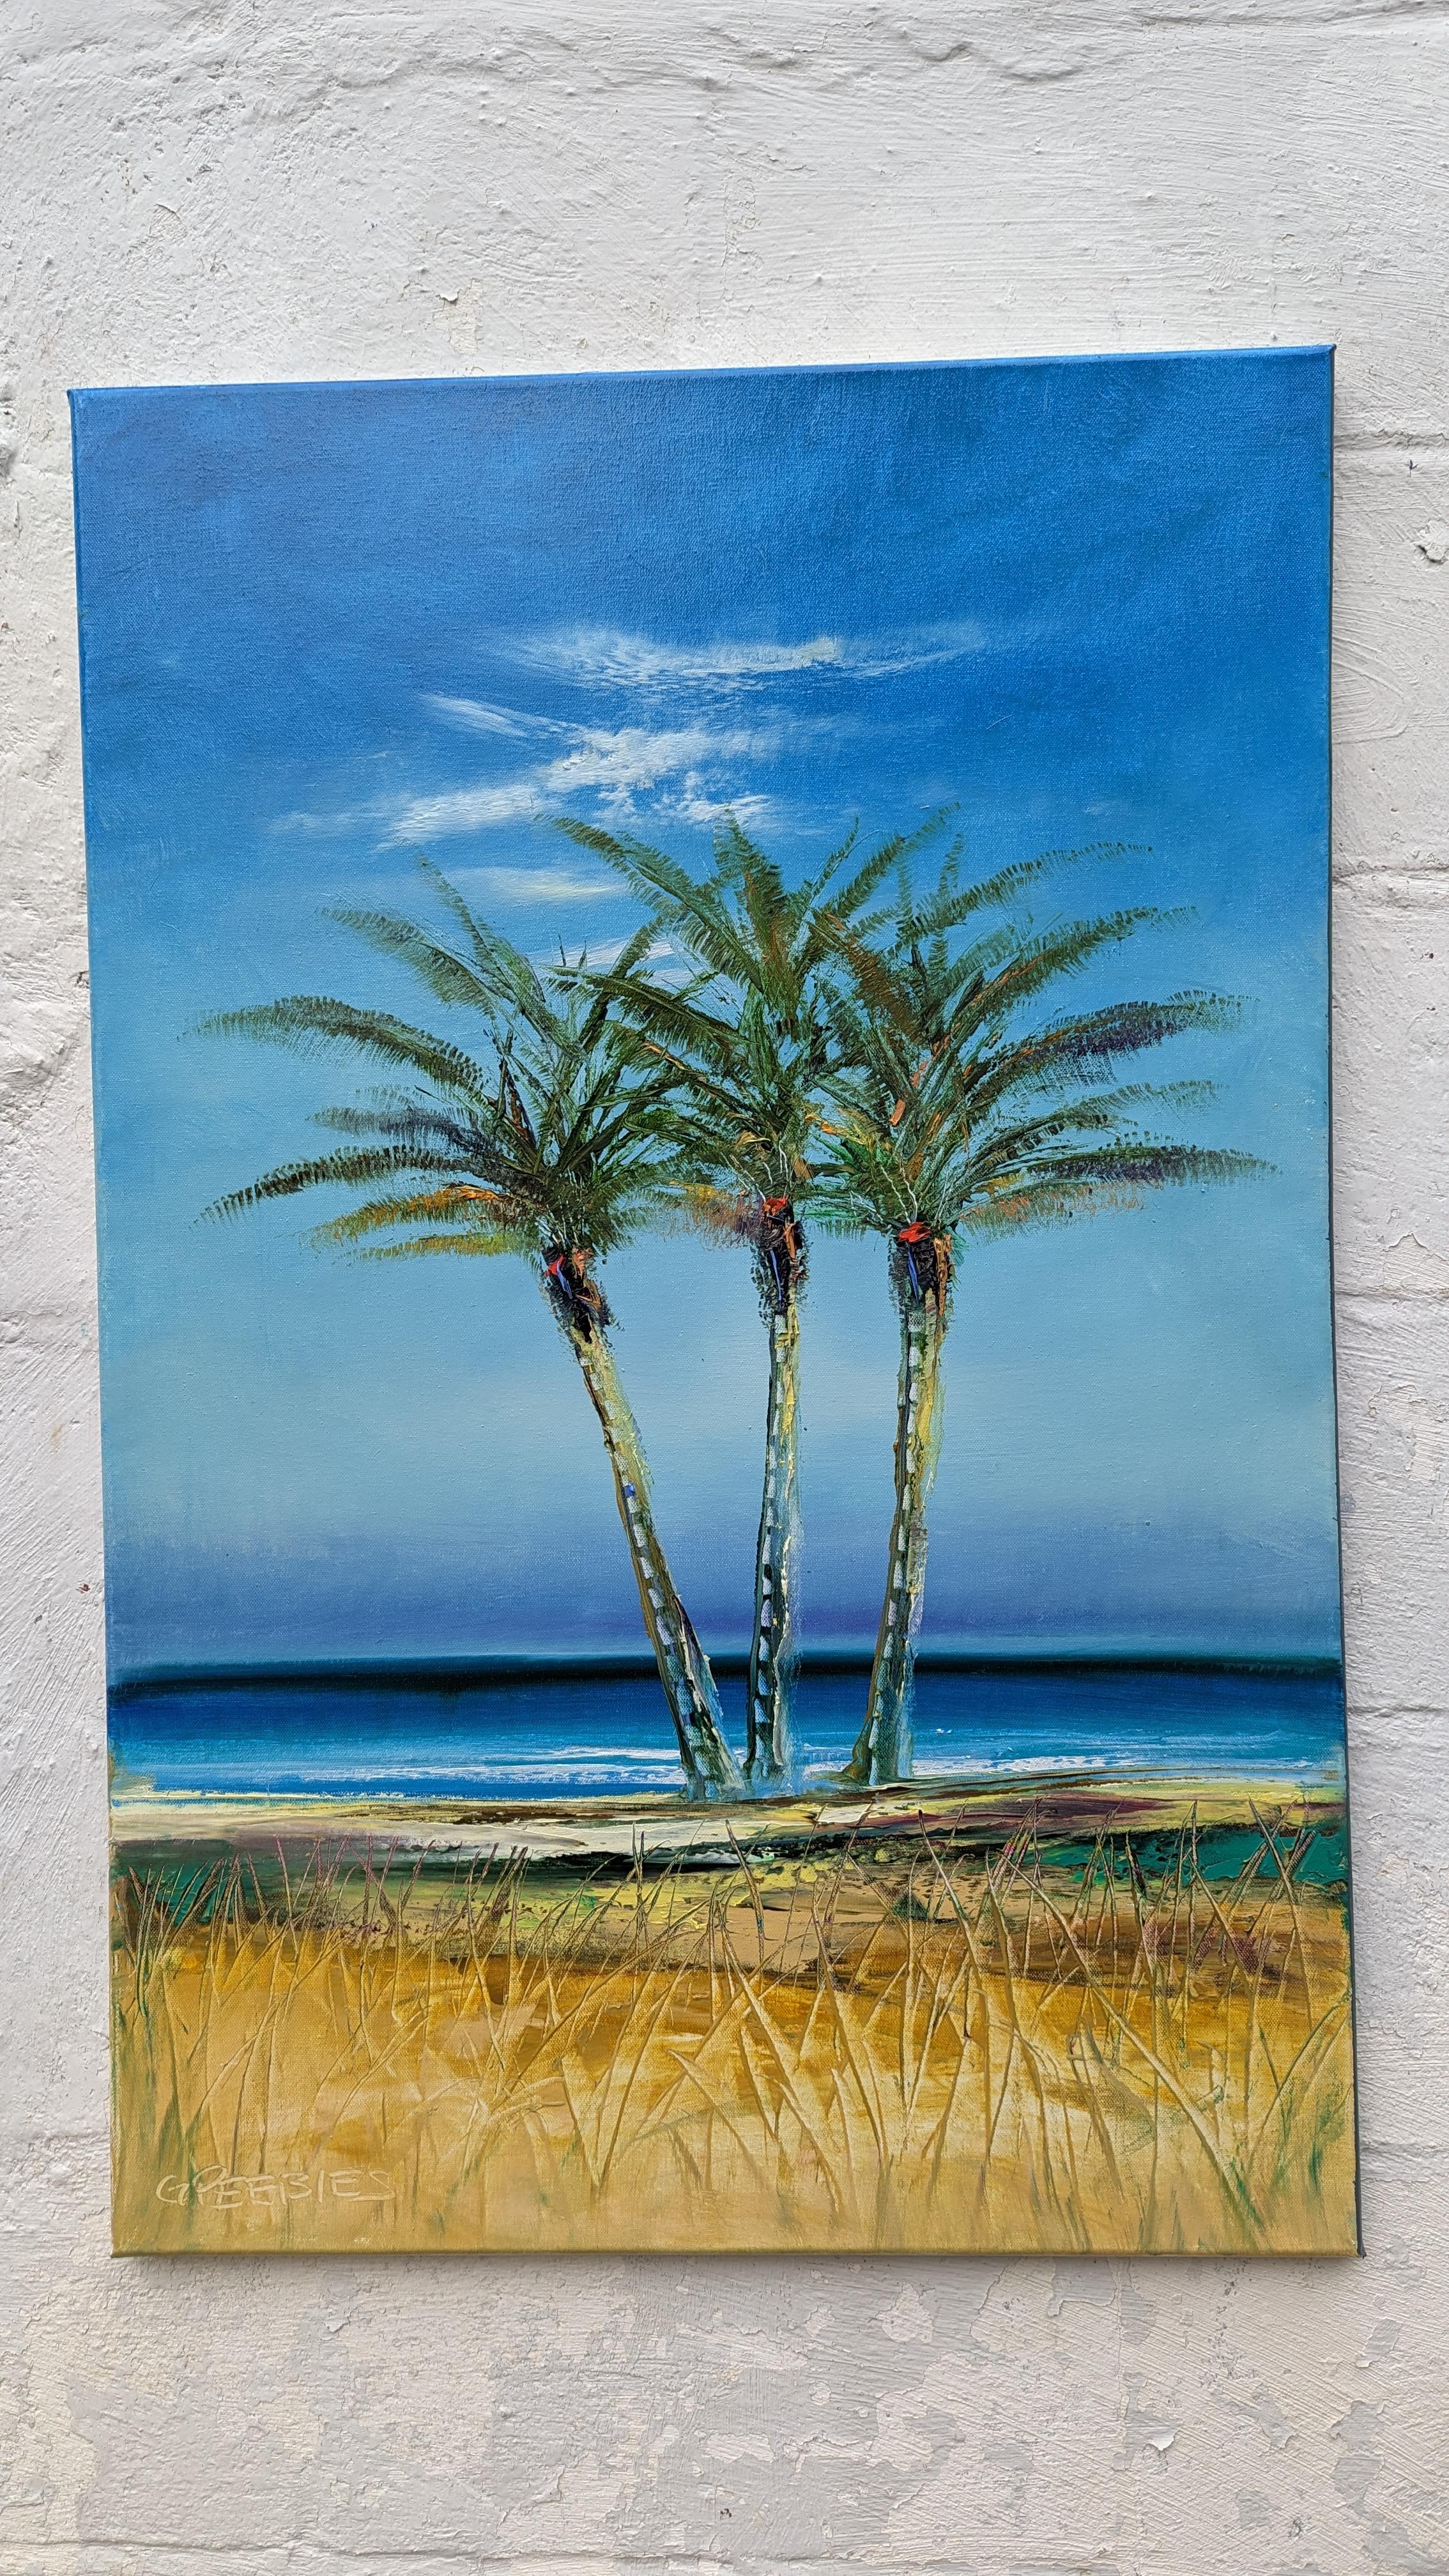 <p>Artist Comments<br>Artist George Peebles displays beautiful palms in a quiet place along the beach. He paints with an impressionistic approach, carefully portraying light and its changing qualities on air, sea, and land. The bold colors of the